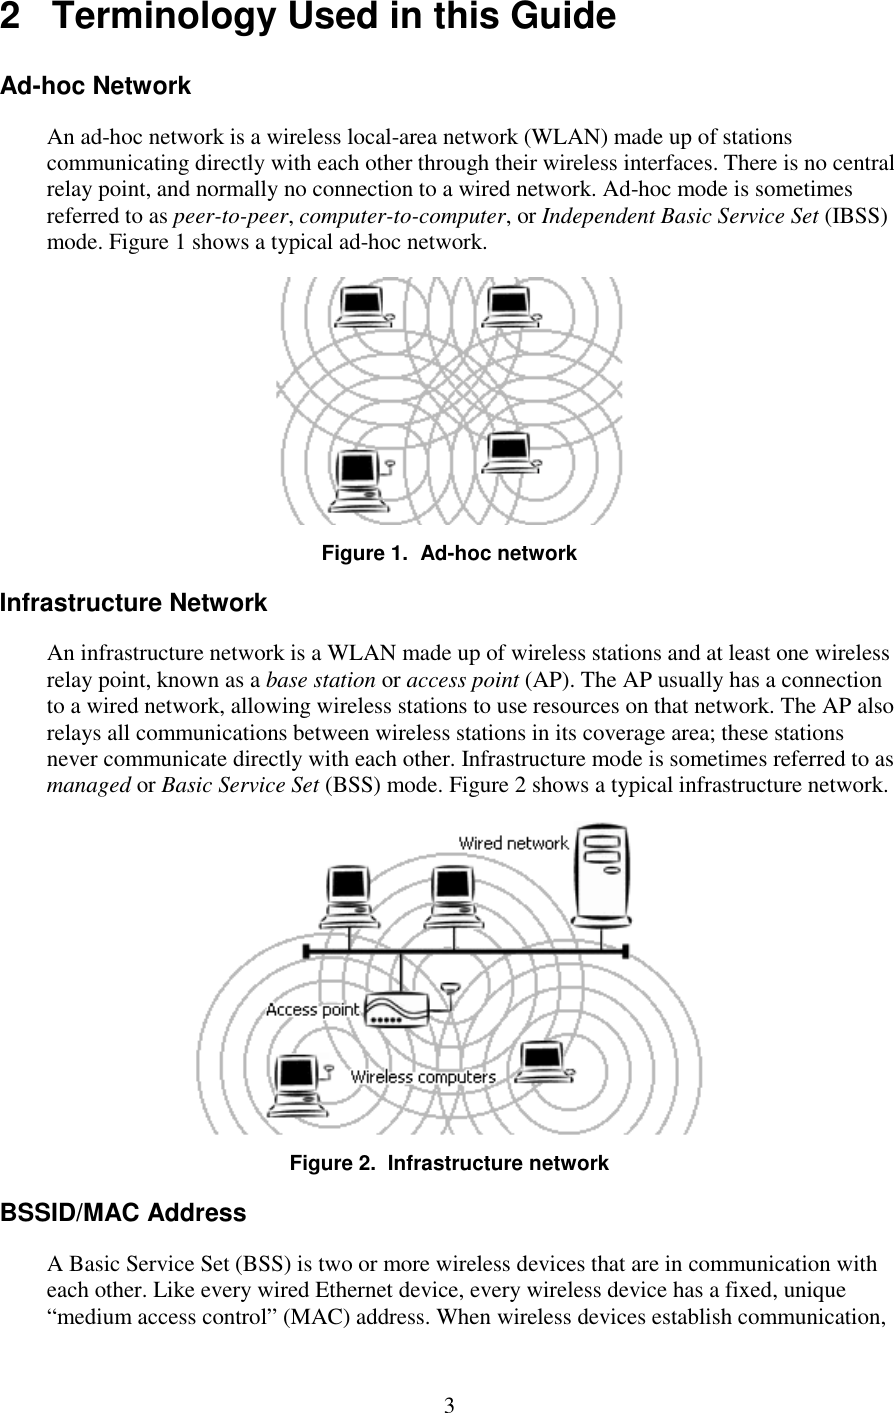   3 2   Terminology Used in this Guide Ad-hoc Network An ad-hoc network is a wireless local-area network (WLAN) made up of stations communicating directly with each other through their wireless interfaces. There is no central relay point, and normally no connection to a wired network. Ad-hoc mode is sometimes referred to as peer-to-peer, computer-to-computer, or Independent Basic Service Set (IBSS) mode. Figure 1 shows a typical ad-hoc network.  Figure 1.  Ad-hoc network Infrastructure Network An infrastructure network is a WLAN made up of wireless stations and at least one wireless relay point, known as a base station or access point (AP). The AP usually has a connection to a wired network, allowing wireless stations to use resources on that network. The AP also relays all communications between wireless stations in its coverage area; these stations never communicate directly with each other. Infrastructure mode is sometimes referred to as managed or Basic Service Set (BSS) mode. Figure 2 shows a typical infrastructure network.  Figure 2.  Infrastructure network BSSID/MAC Address A Basic Service Set (BSS) is two or more wireless devices that are in communication with each other. Like every wired Ethernet device, every wireless device has a fixed, unique “medium access control” (MAC) address. When wireless devices establish communication, 